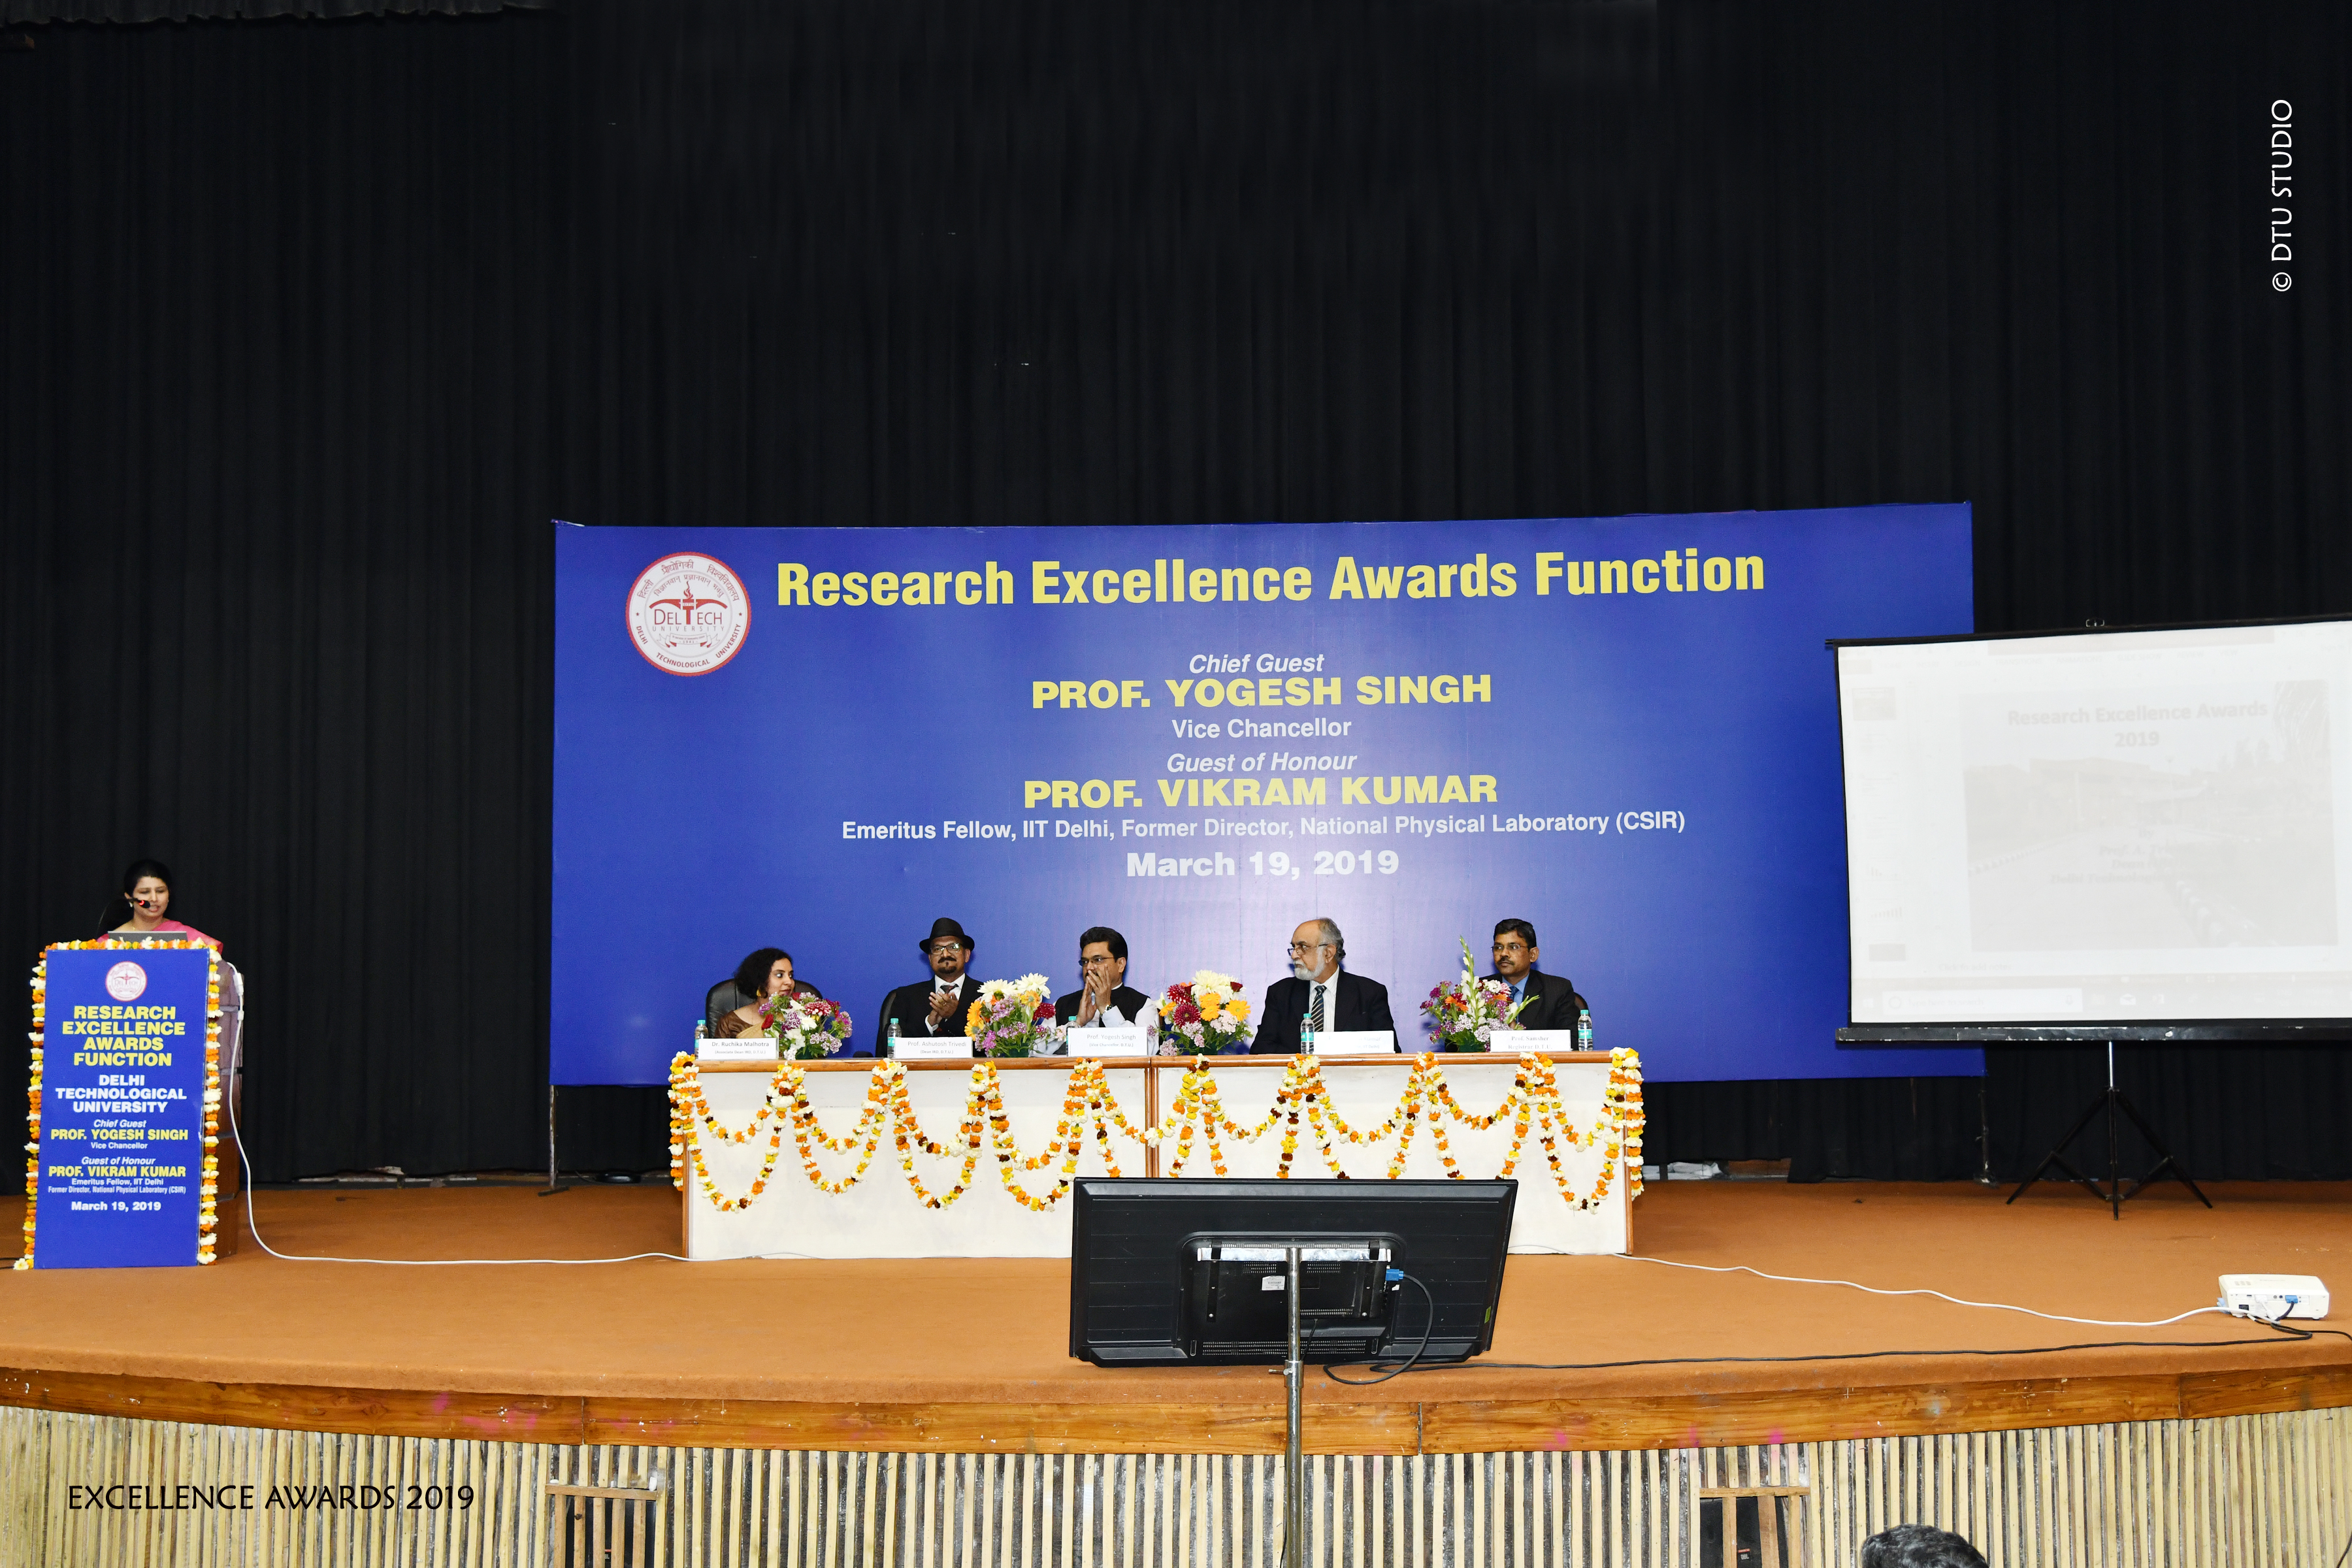 Research Excellence Awards